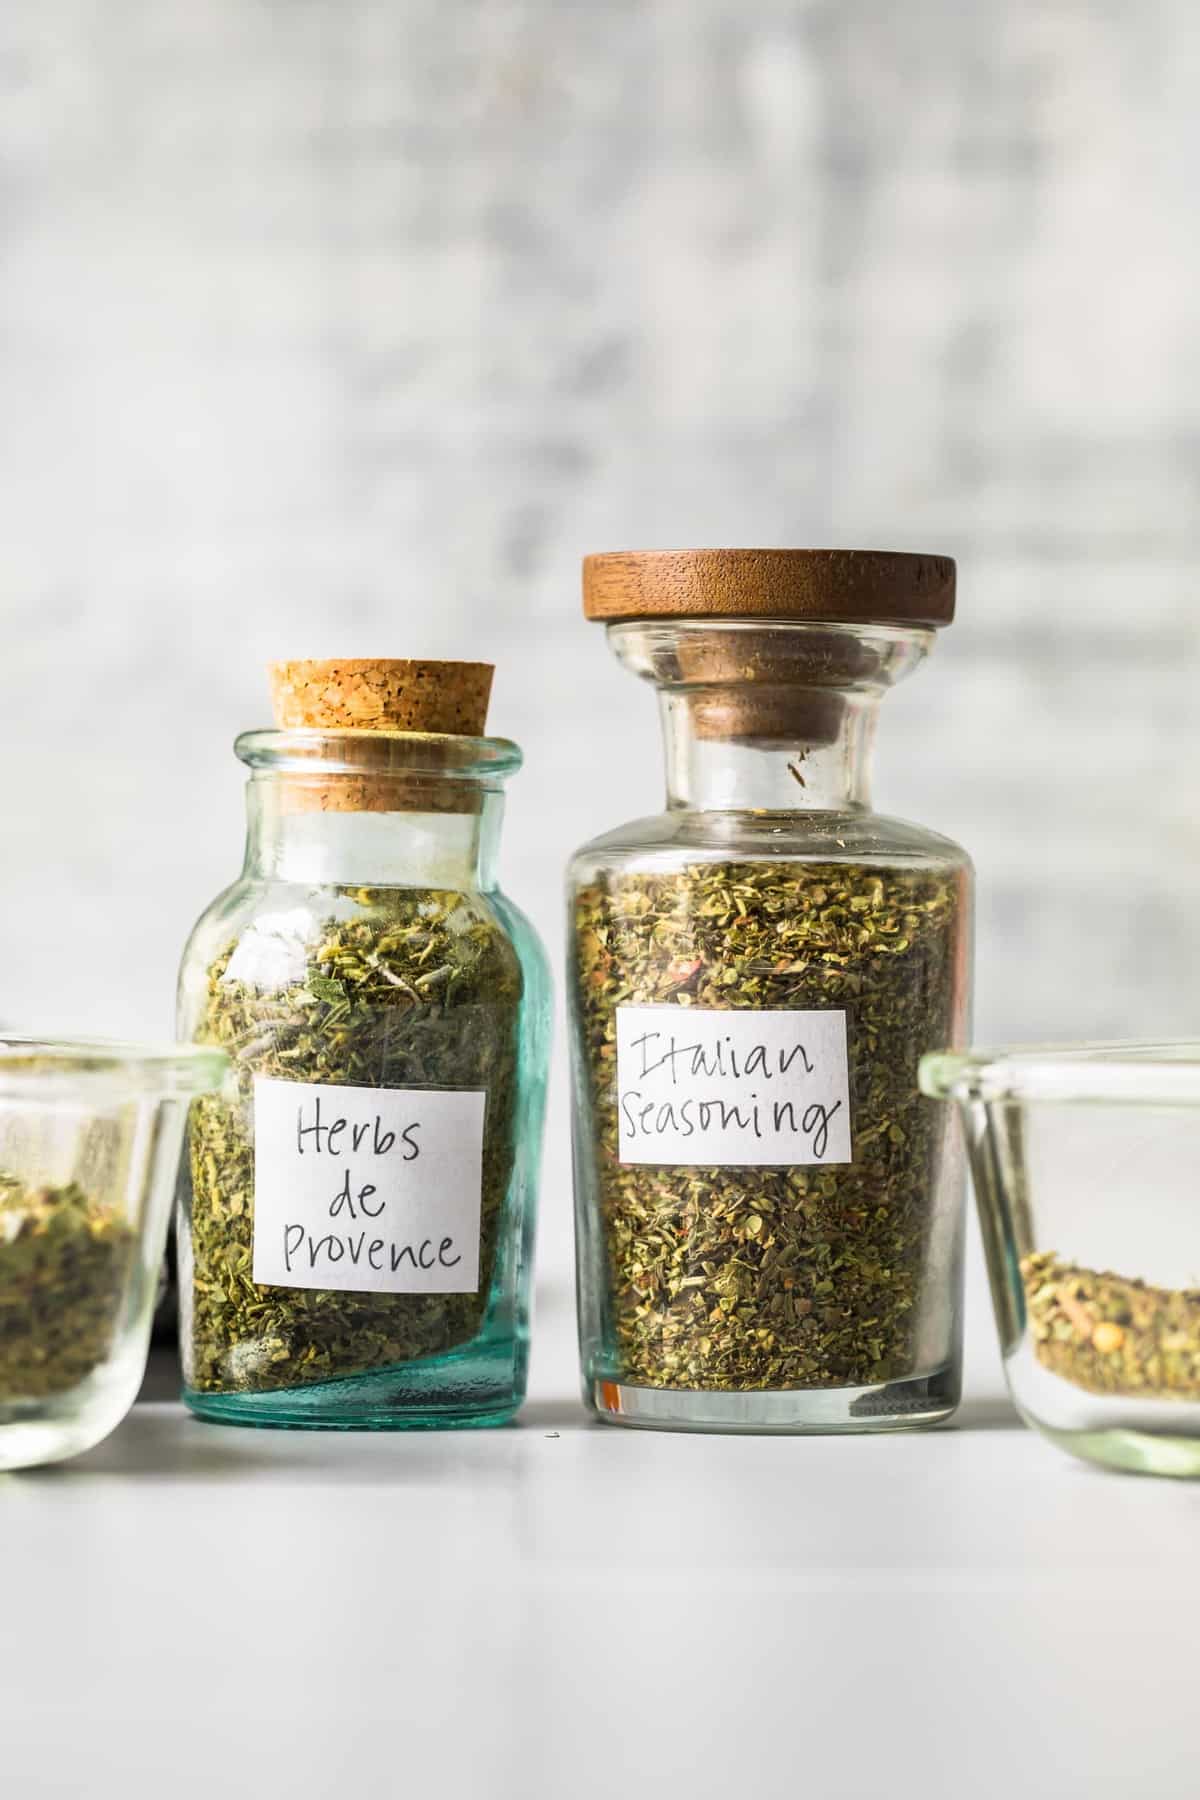 To glass bottles with herb seasoning